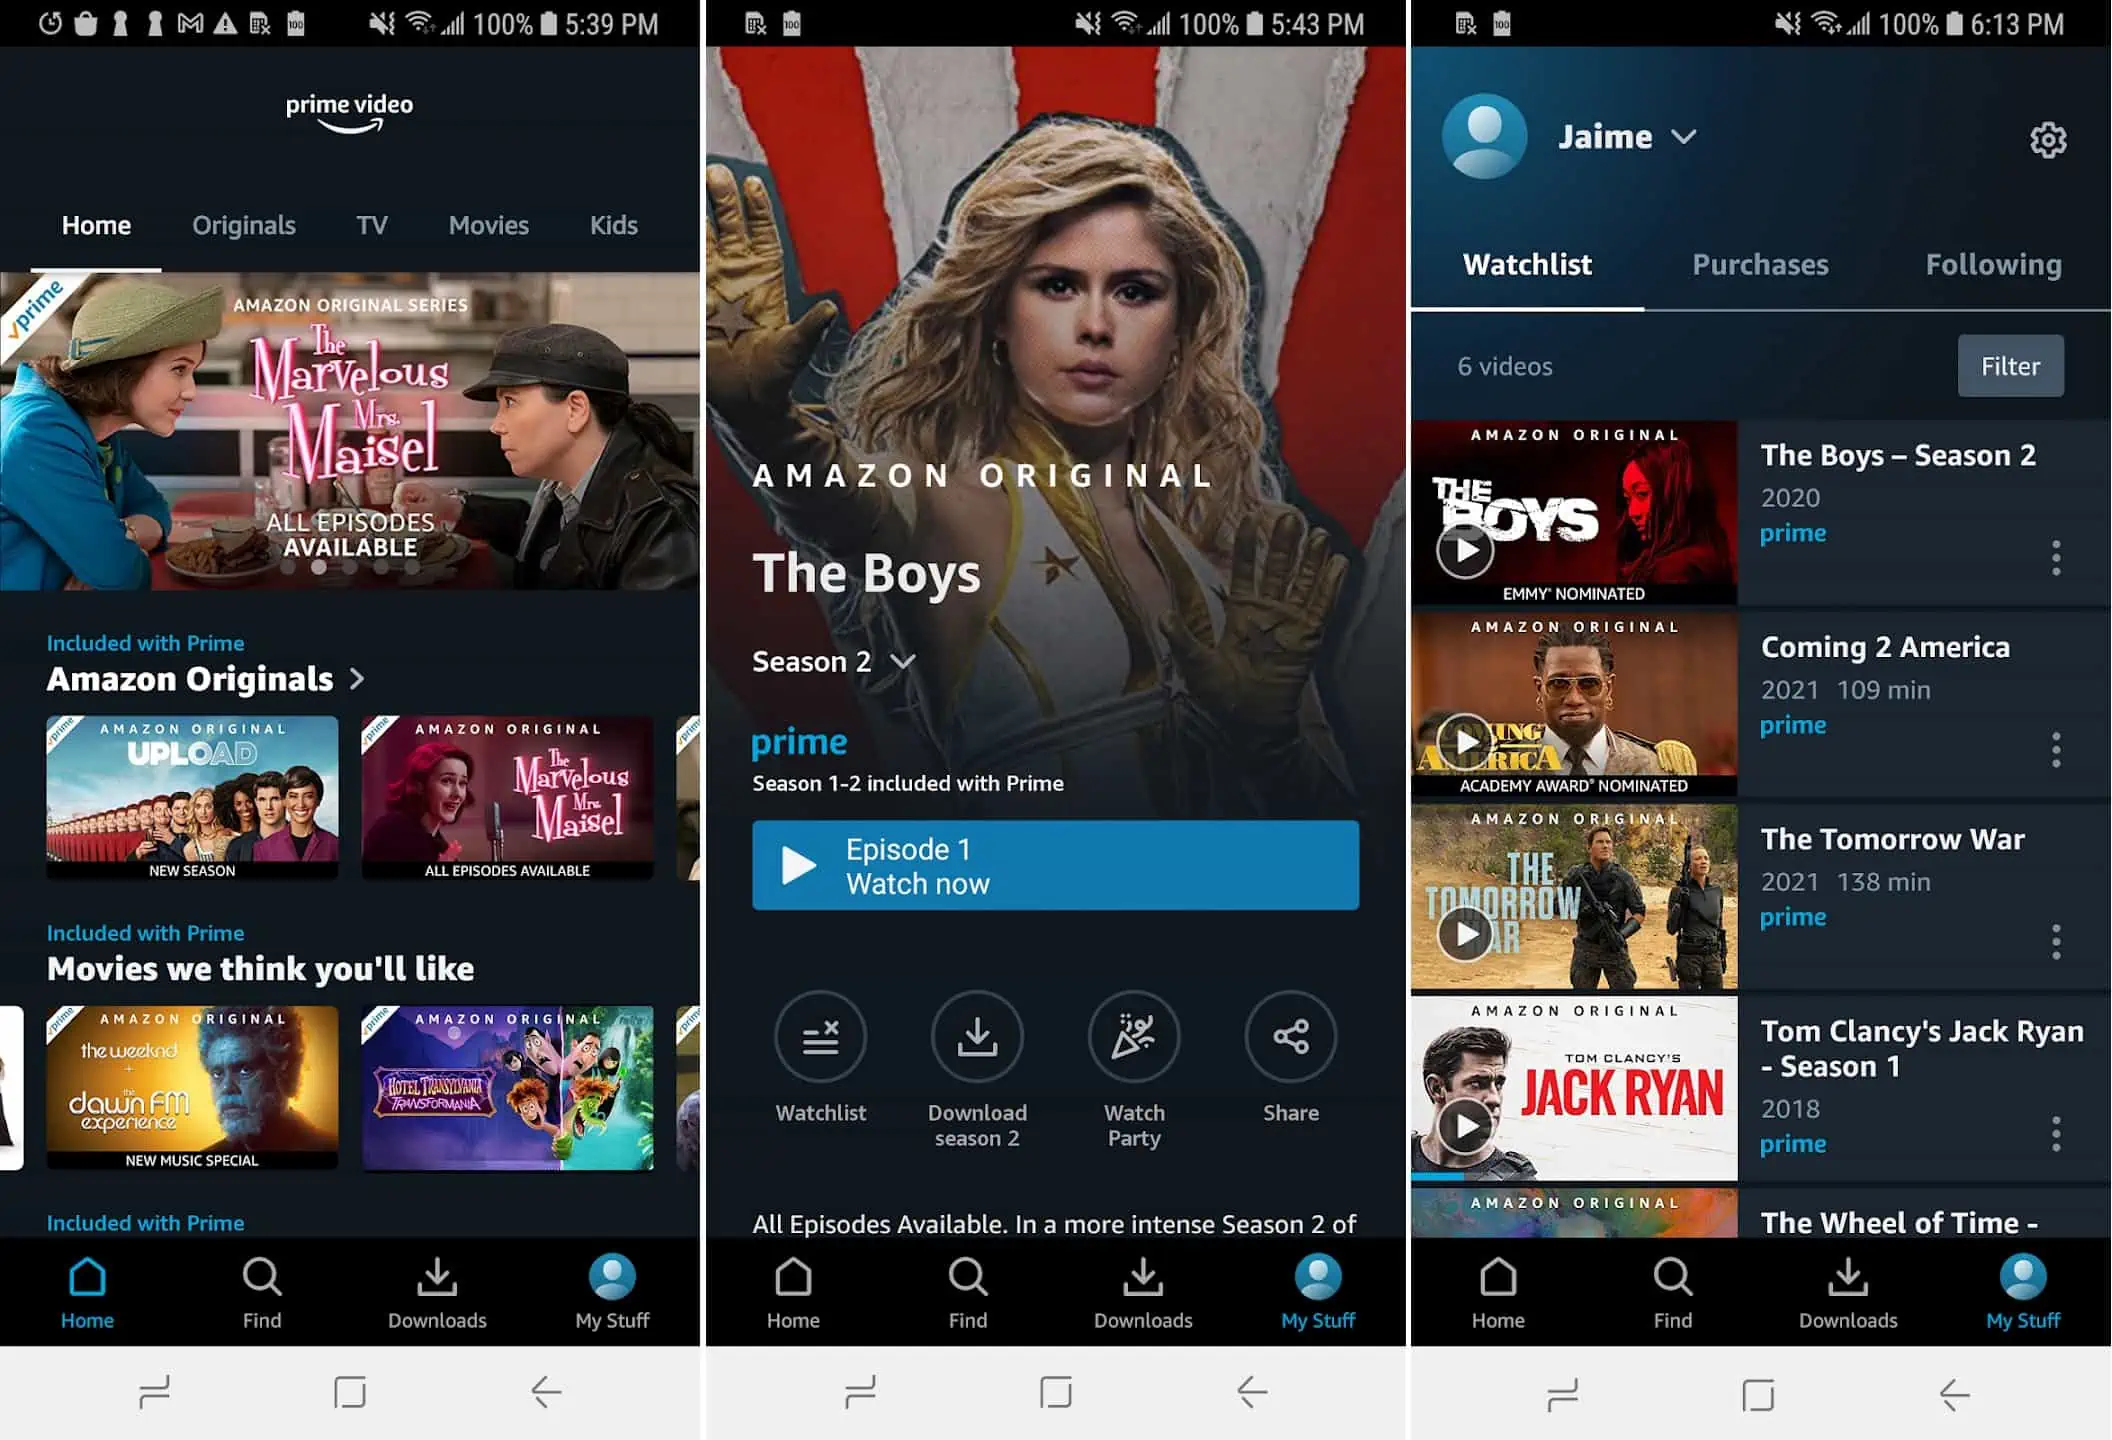 Amazon Prime Video streaming apps